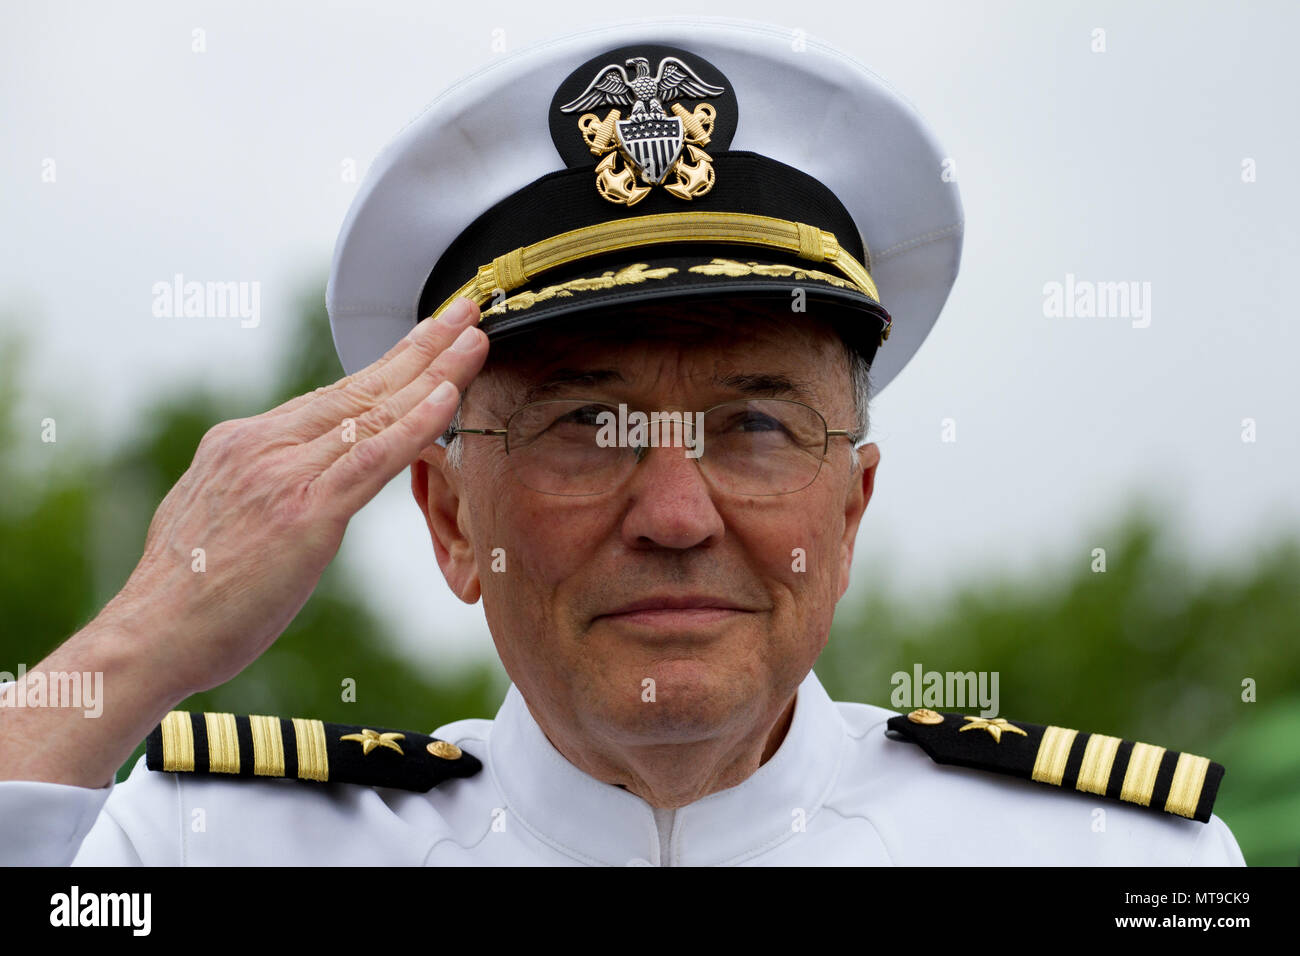 Philadelphia, United States. 28th May, 2018. Ret. USN Capt. Louis A. Cavaliere salutes while 'Taps' is played during the Memorial Day ceremony onboard the retired USS Olympia, which carried home the remains of the Unknown Soldier interred at Arlington National Cemetery from France in 1921. Credit: Michael Candelori/Pacific Press/Alamy Live News Stock Photo